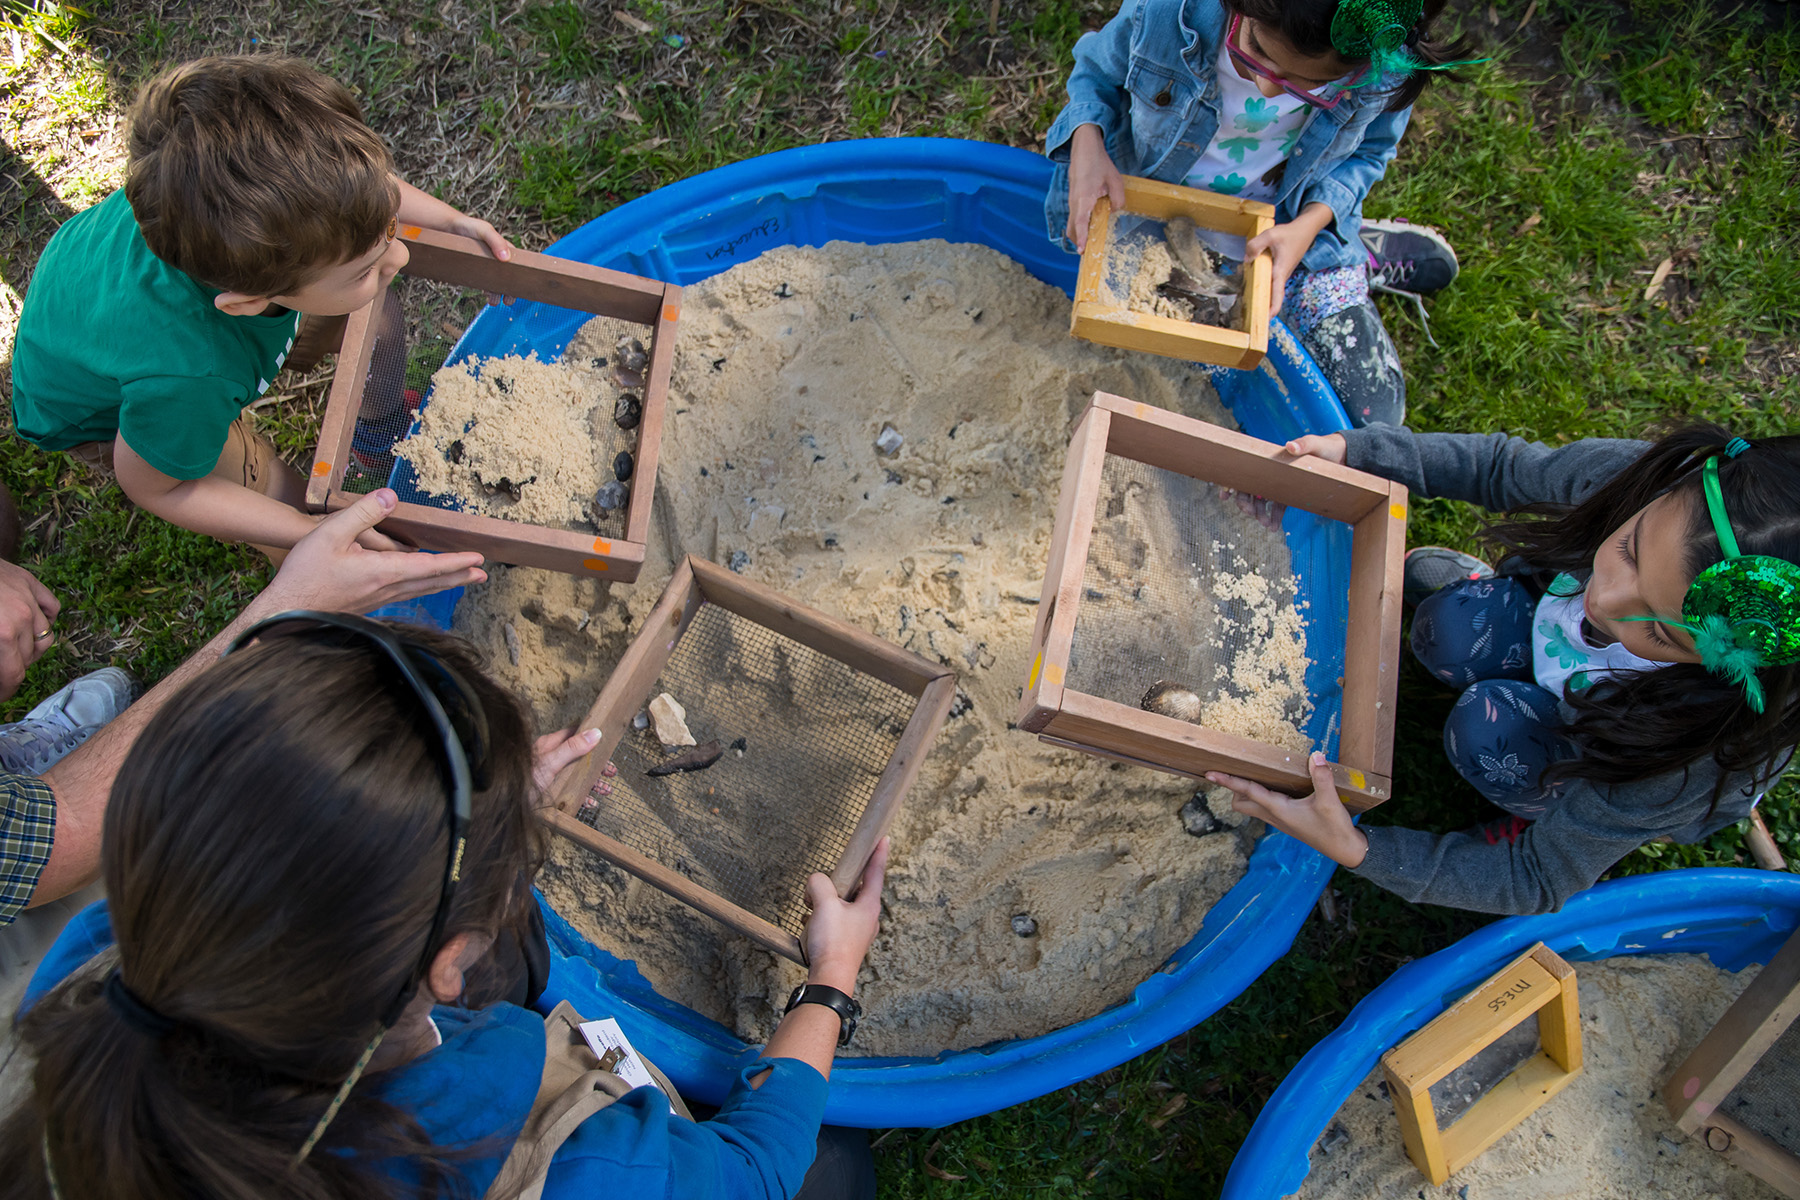 several young children kneel around a small plastic pool filled with sand and use screens to sift through the sand to find rock and fossils